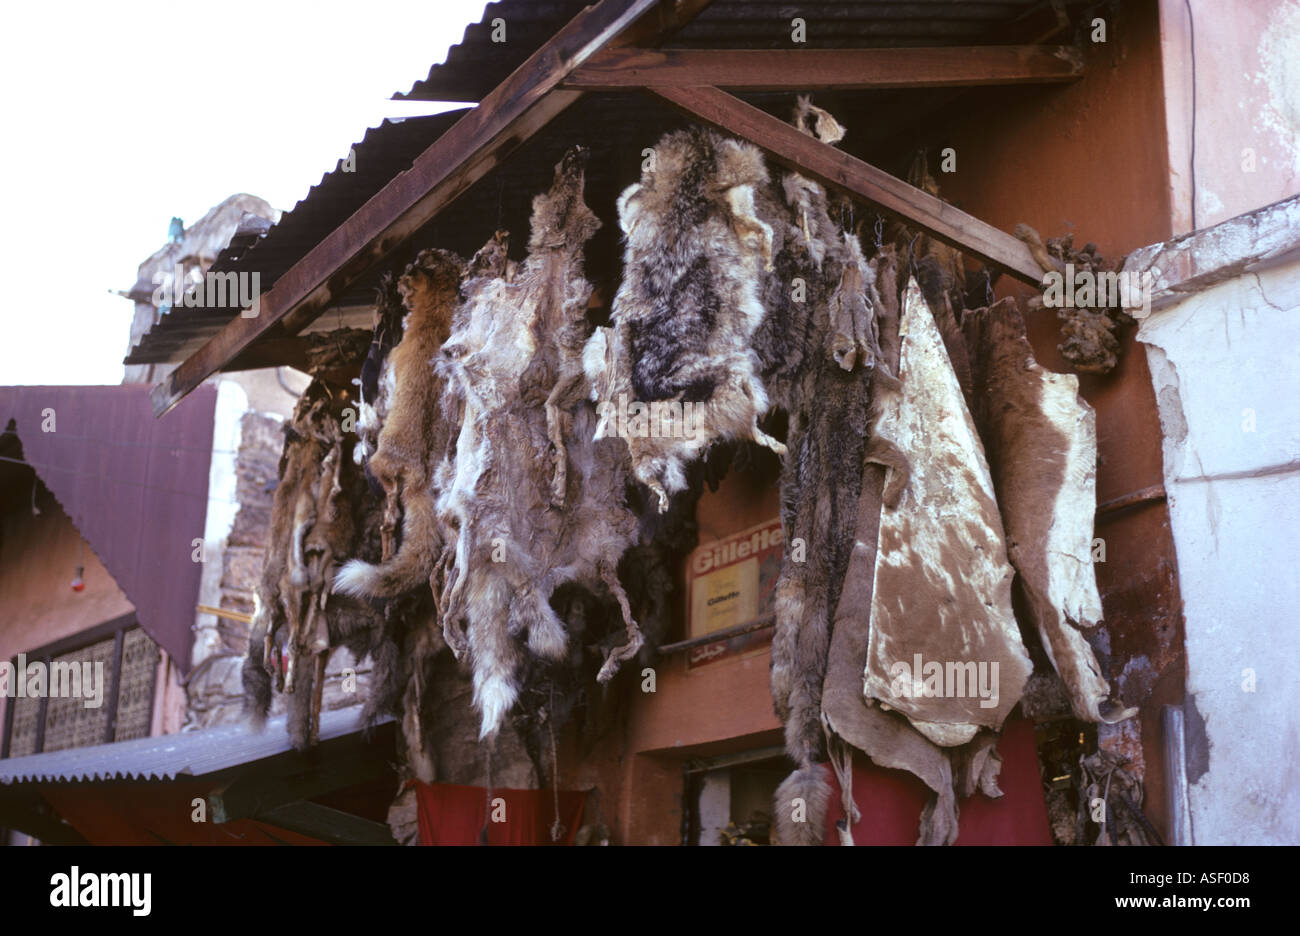 Animal skins on sale at witch doctors pharmacy in Marrakesh souk bazaar Morocco Stock Photo